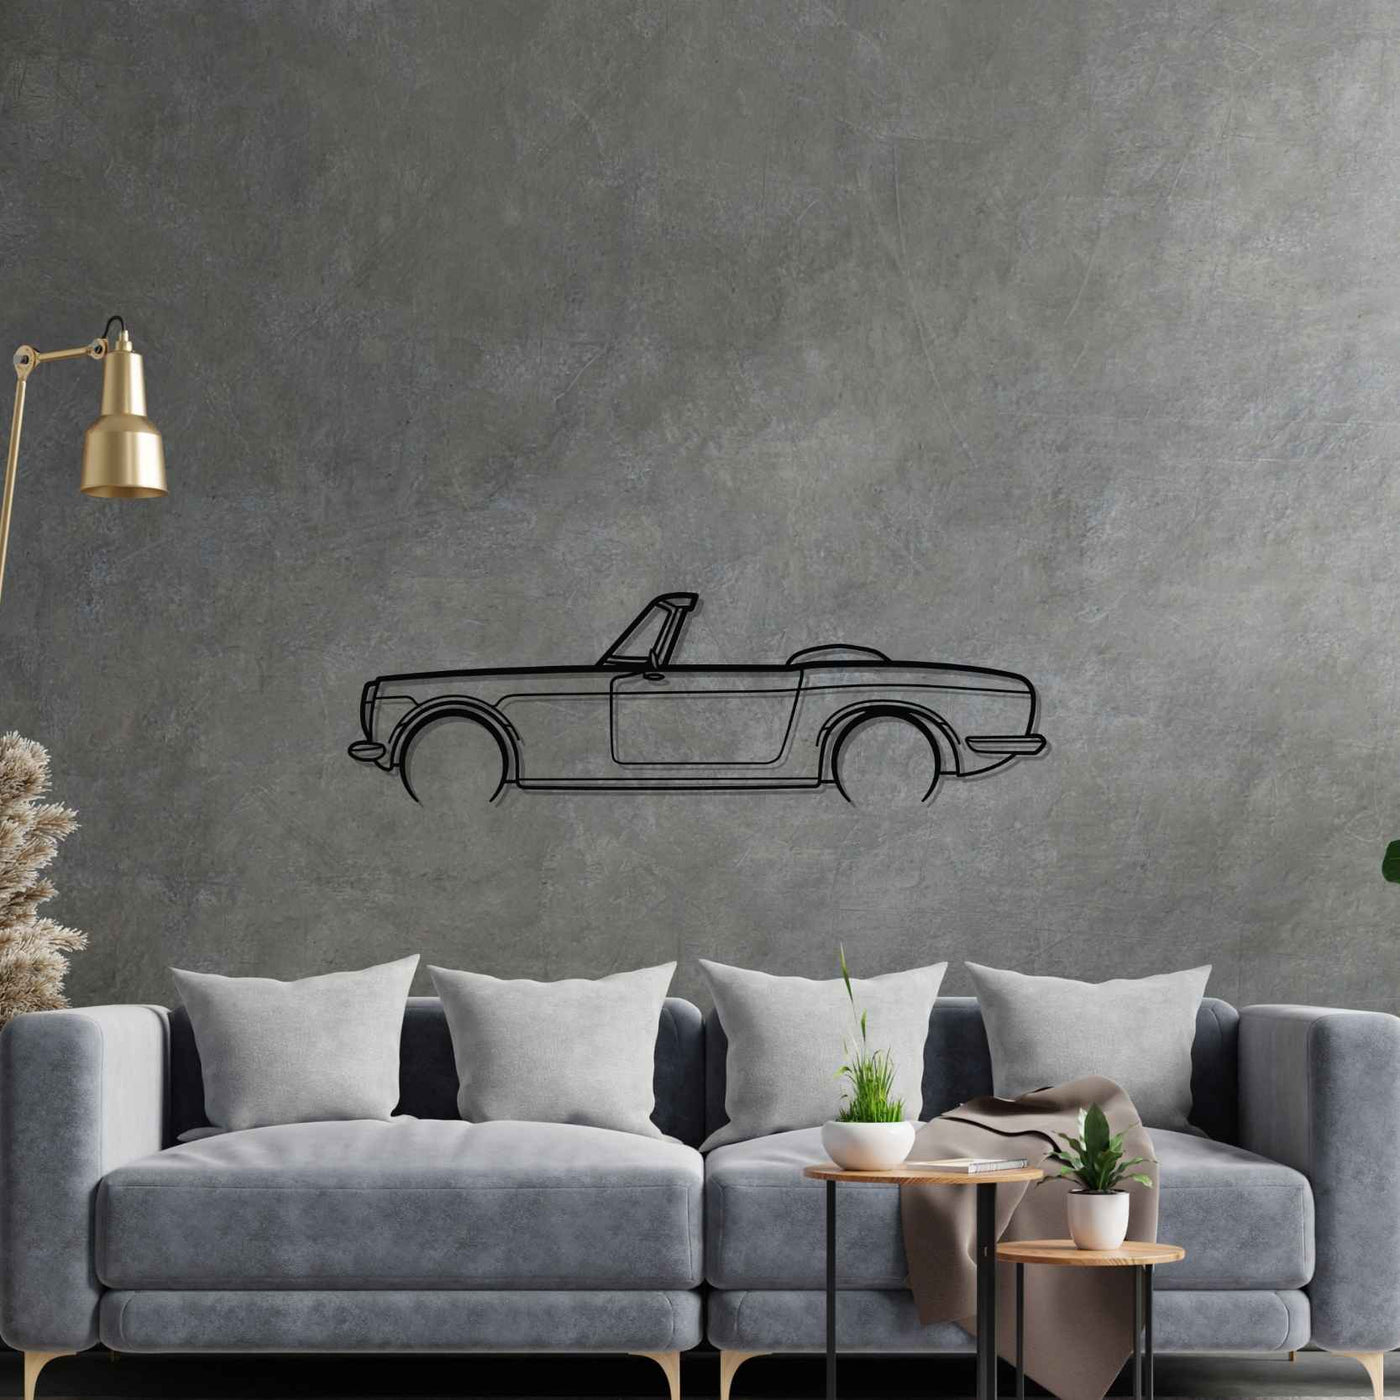 S600 1965 Detailed Silhouette Metal Wall Art